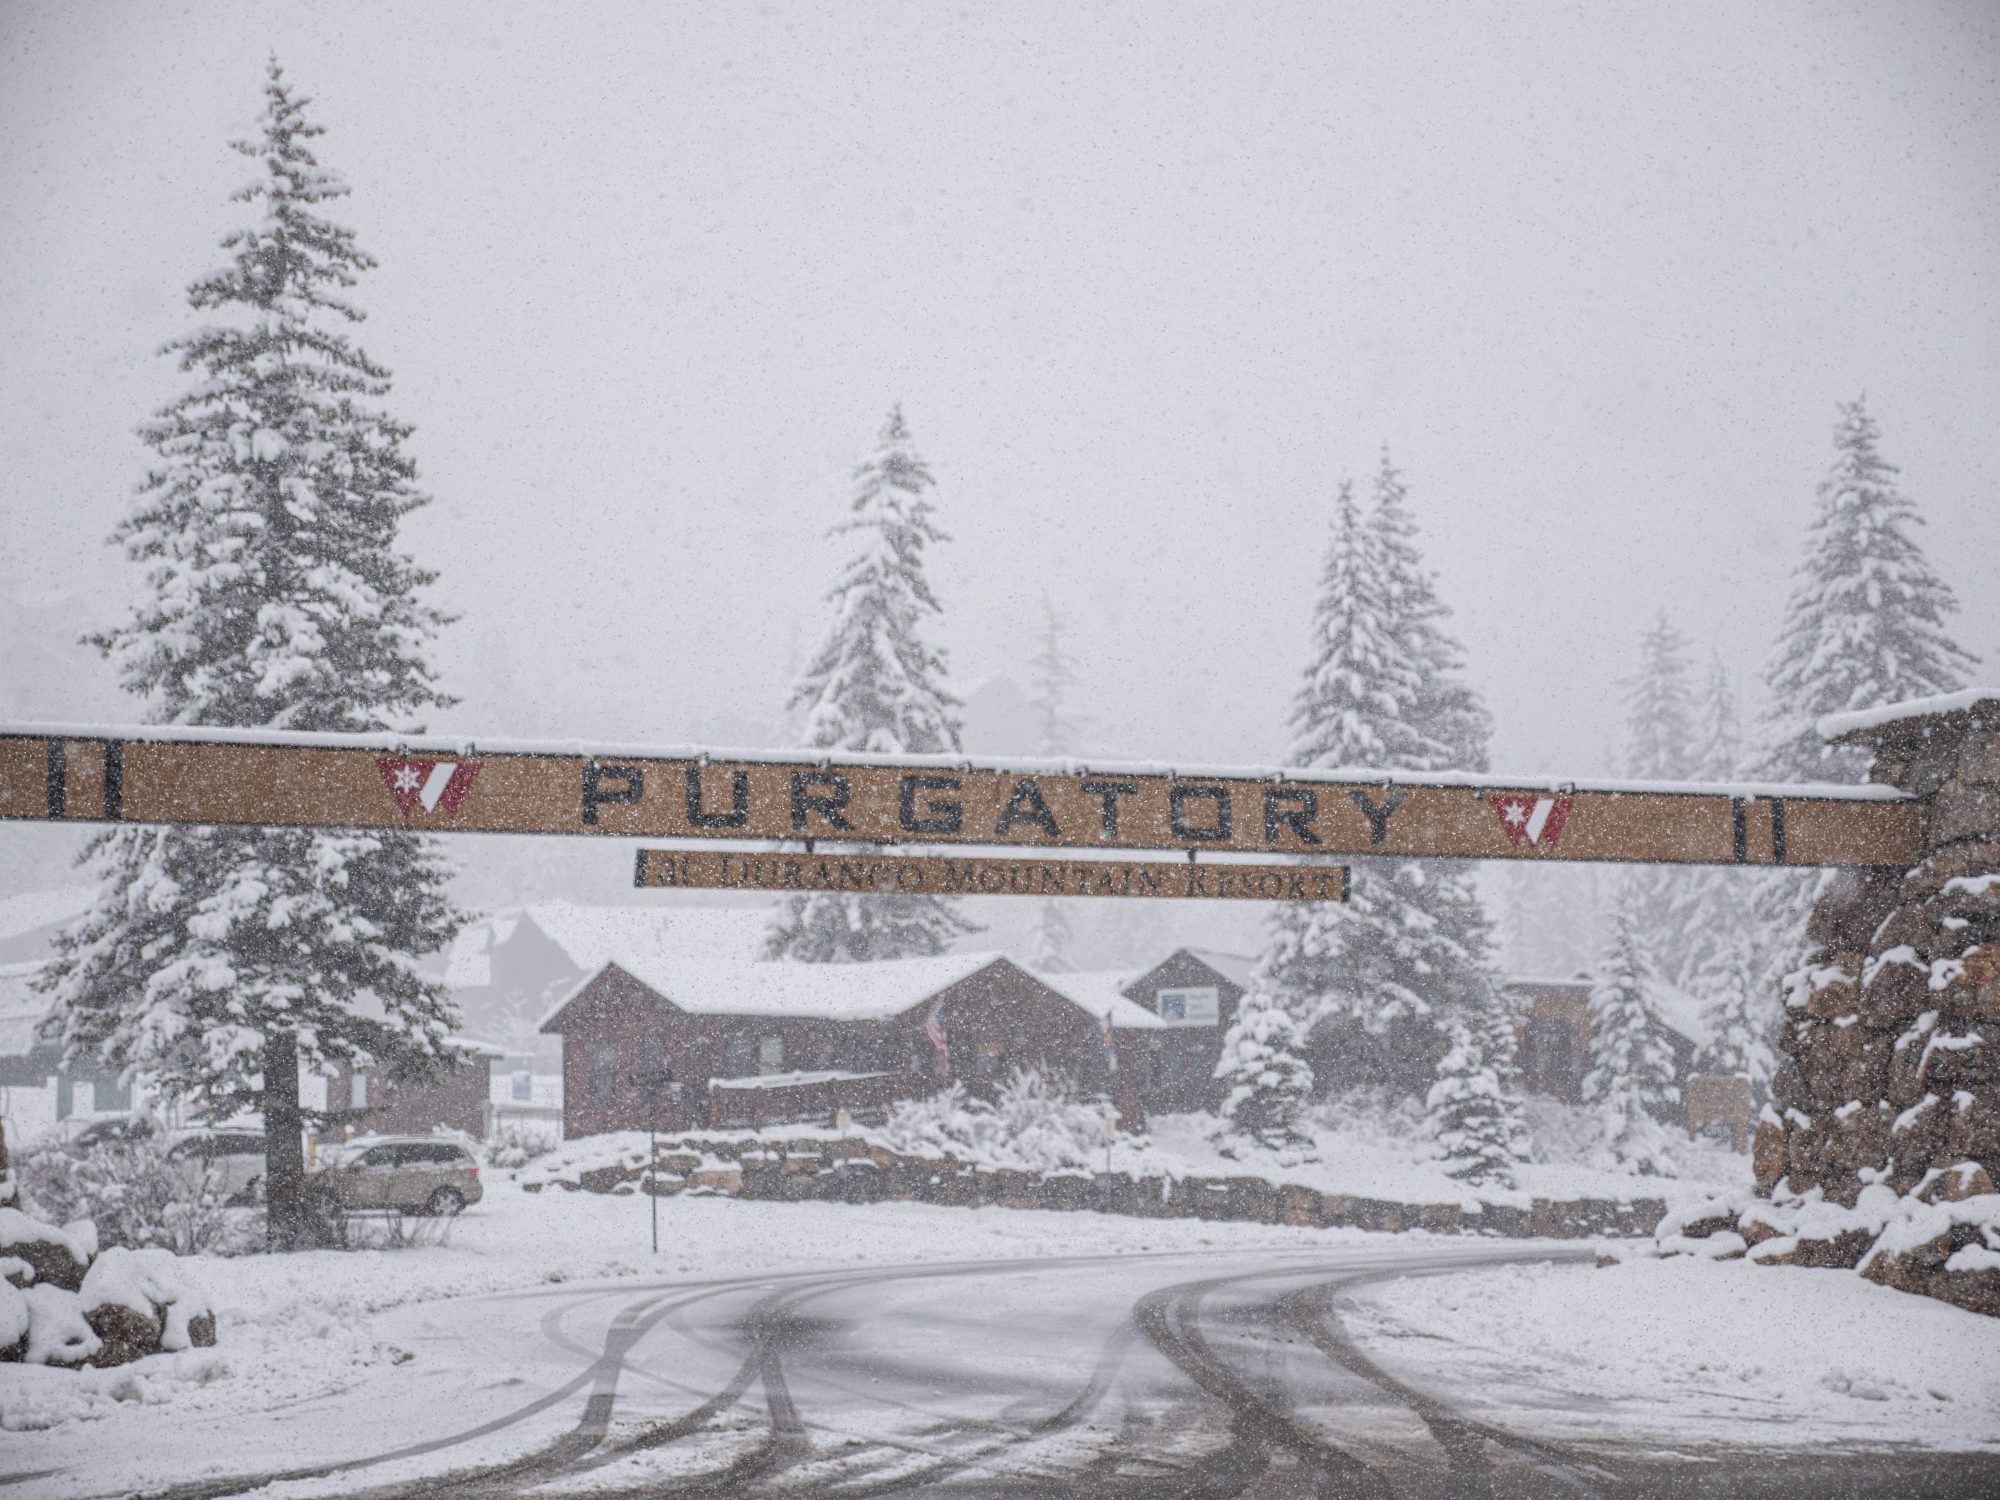 Purgatory Resort photo. PURGATORY Re-Opens for Memorial Day Weekend for the First Time Ever!